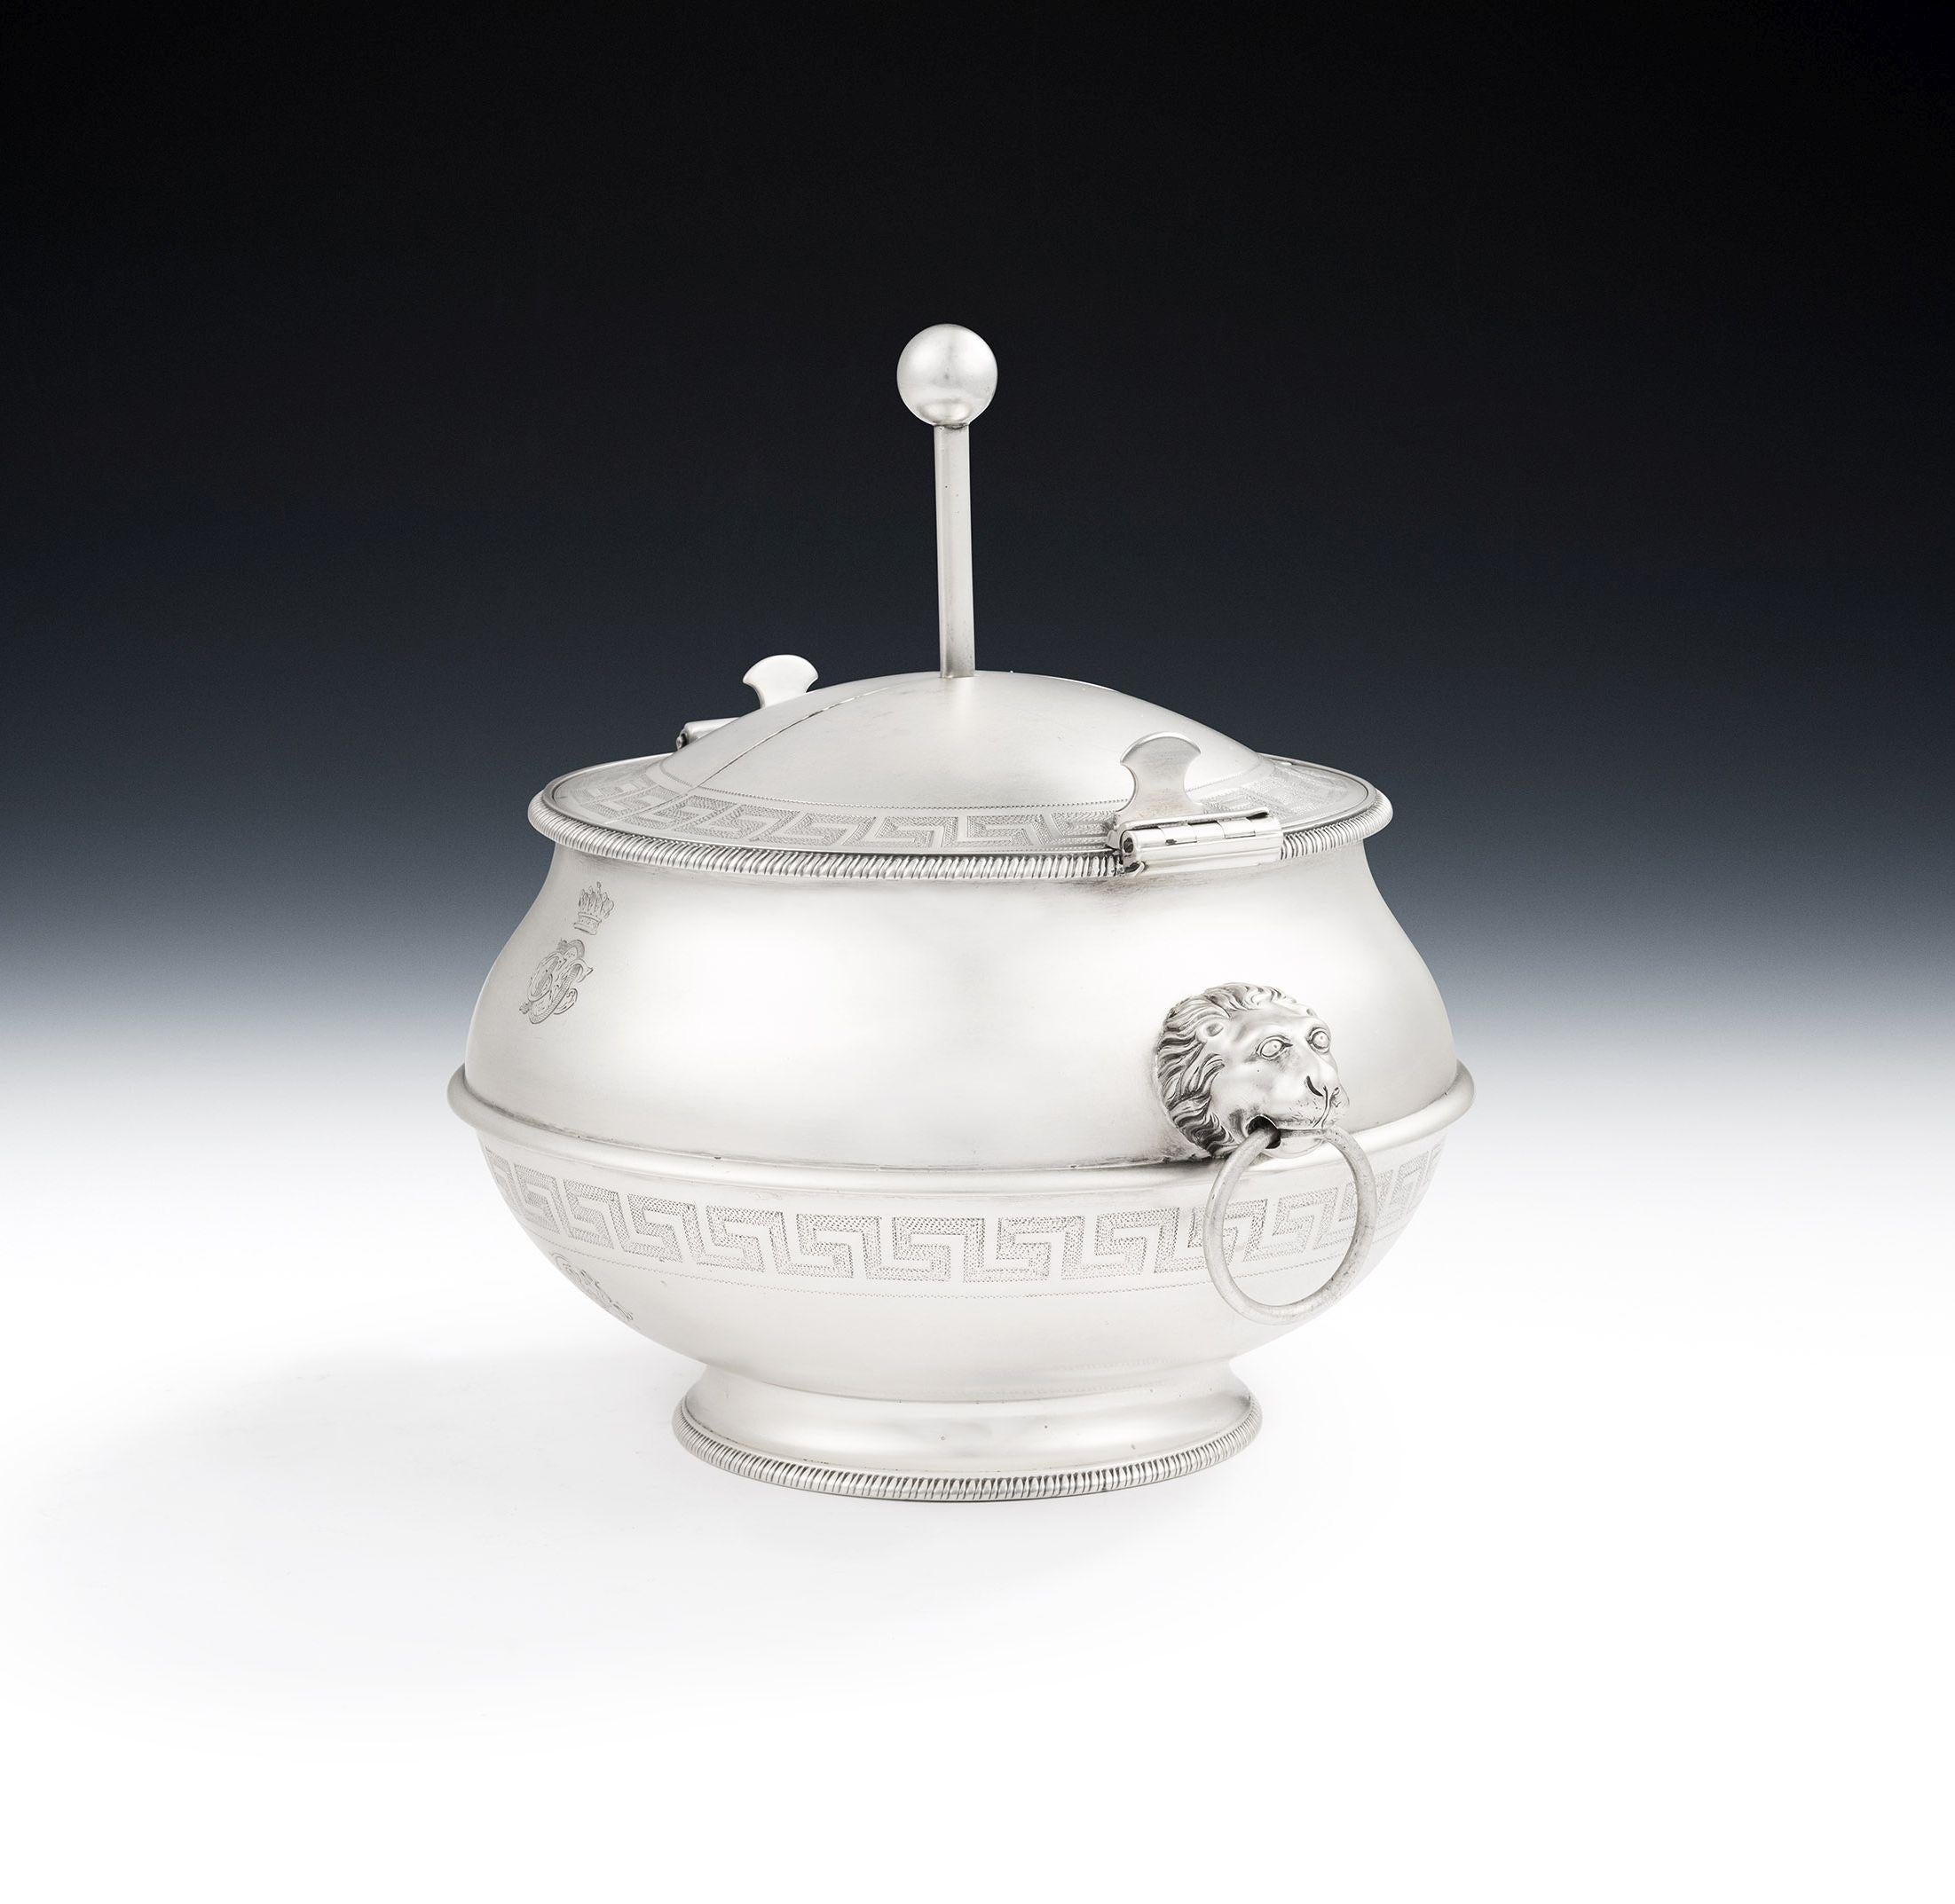 An important & very rare George III Egg Coddler made in London in 1807 by the Royal Silversmith Robert Garrard.

Only a handful of Georgian Egg Coddlers are known to exist and this example is of the finest quality, being made by this superior Royal